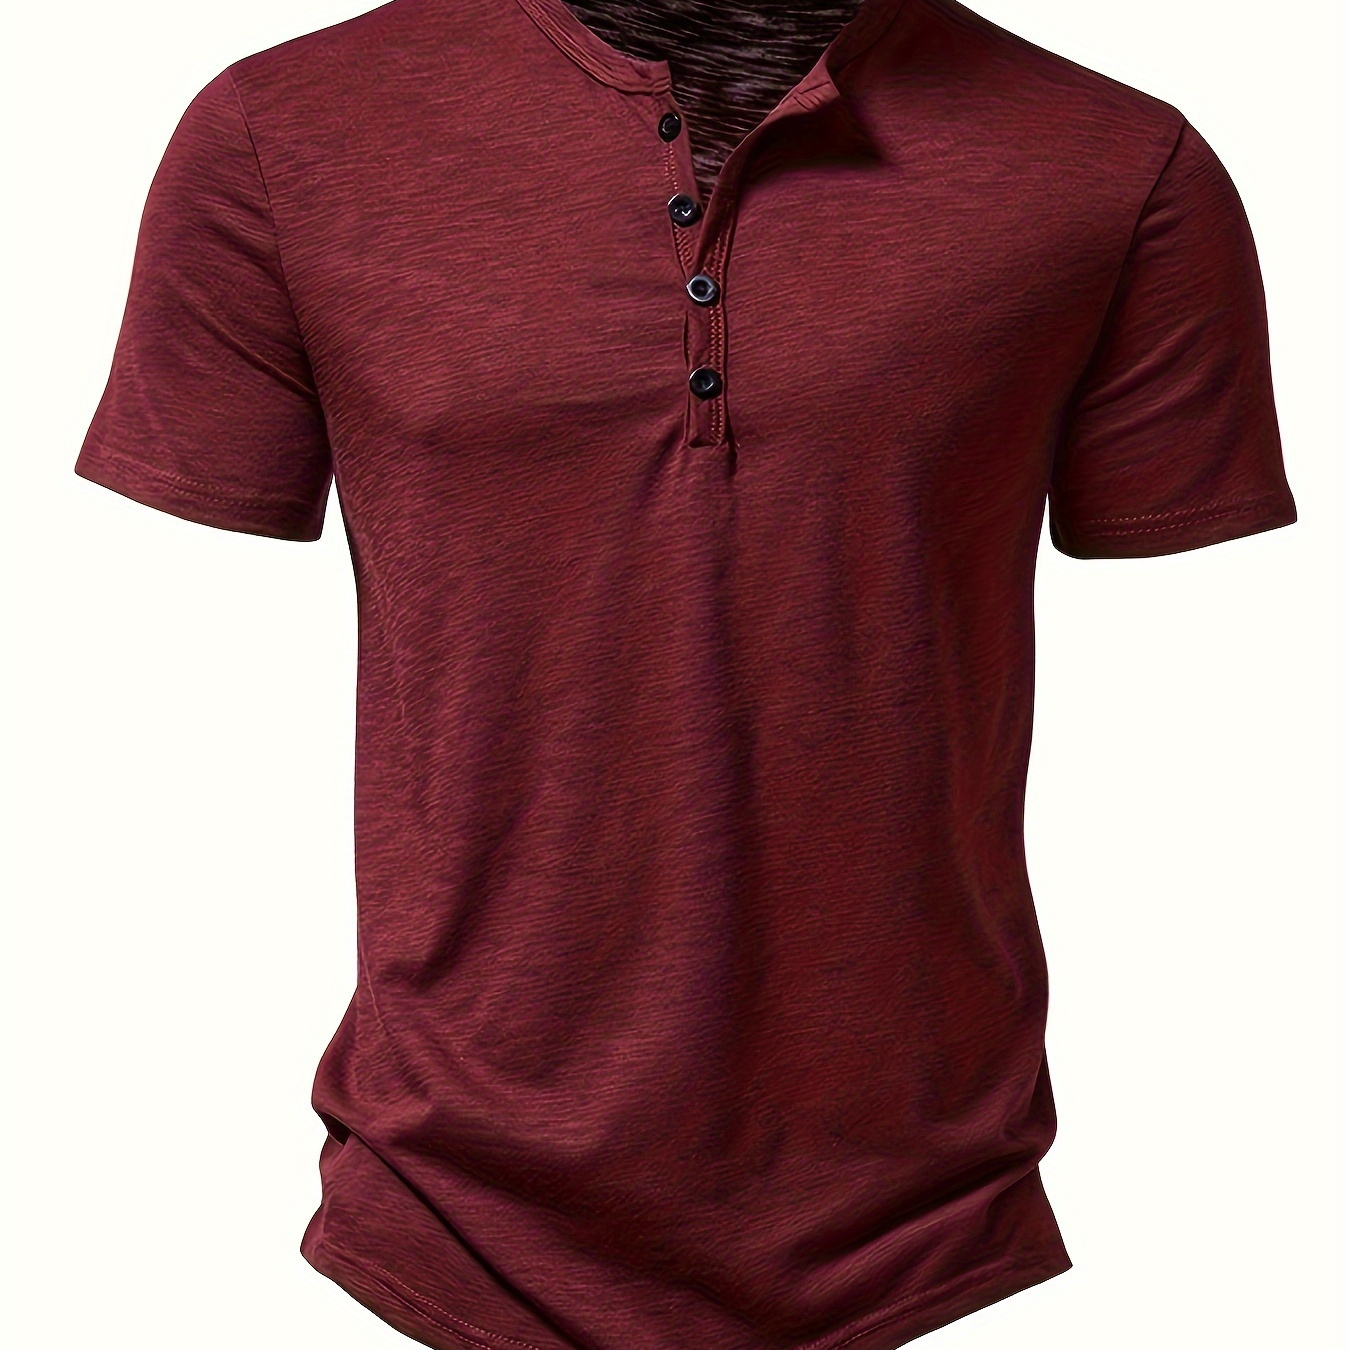 

Men's Trendy Solid Short Sleeve Button Up Crew Neck T-shirt For Summer Daily, Perfect For Outdoor Sports, Stylish Henley T-shirt